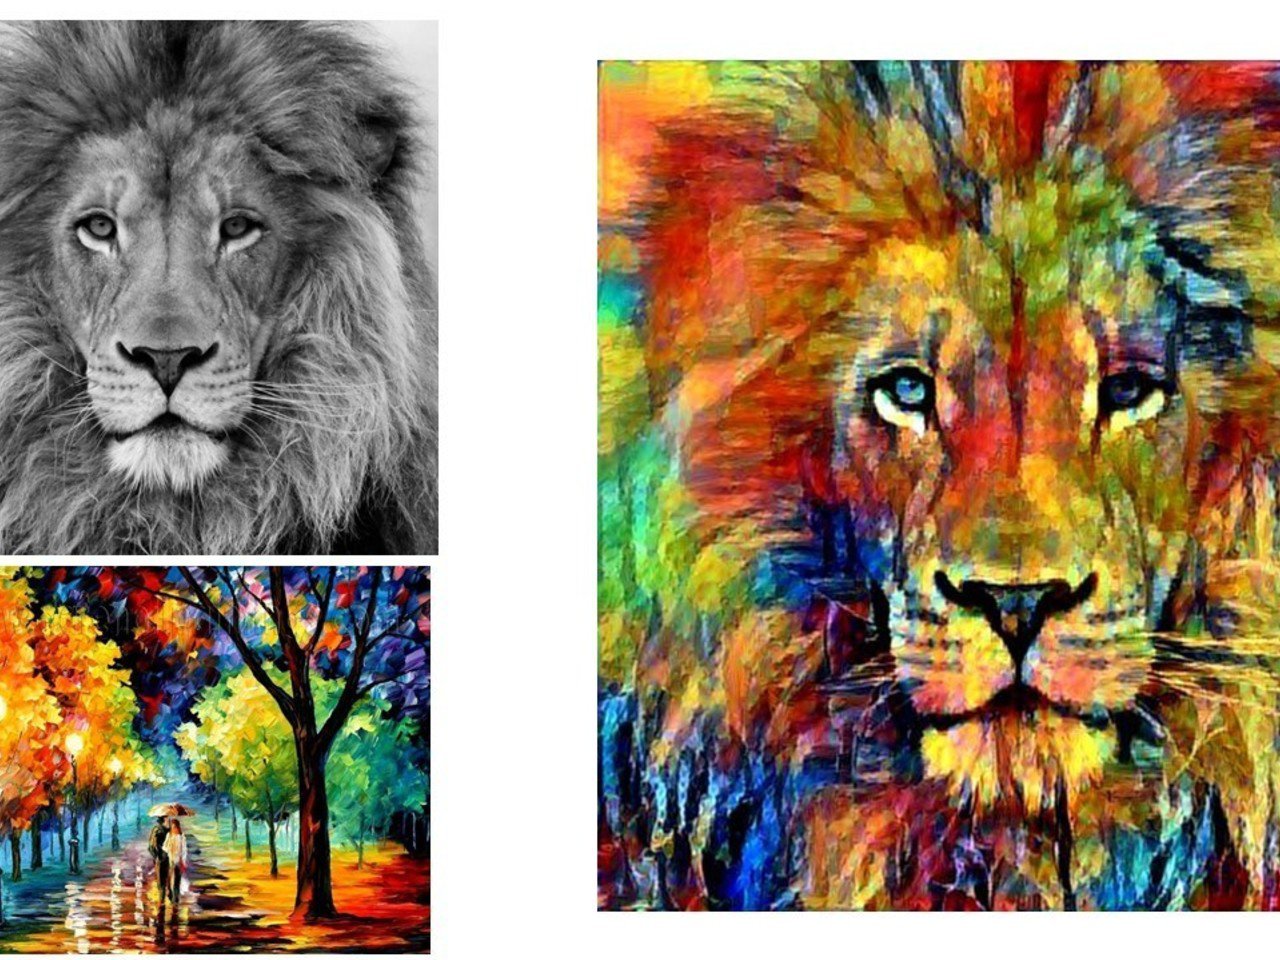 AI that learns the style of an artist and transfer it to other images